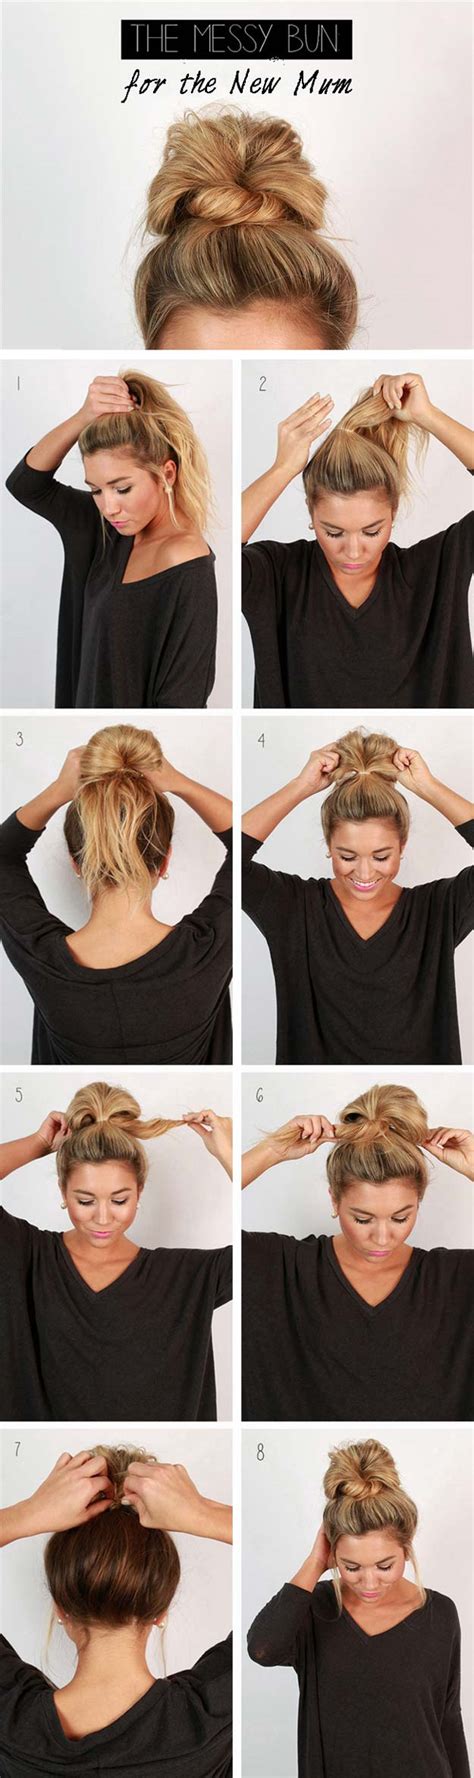 The article observes easy and cute hairstyles for short hair, medium hair, shoulder length and long easy and cute hairstyles. 12 Cute and Easy Hairstyles that Can Be Done in a Few ...